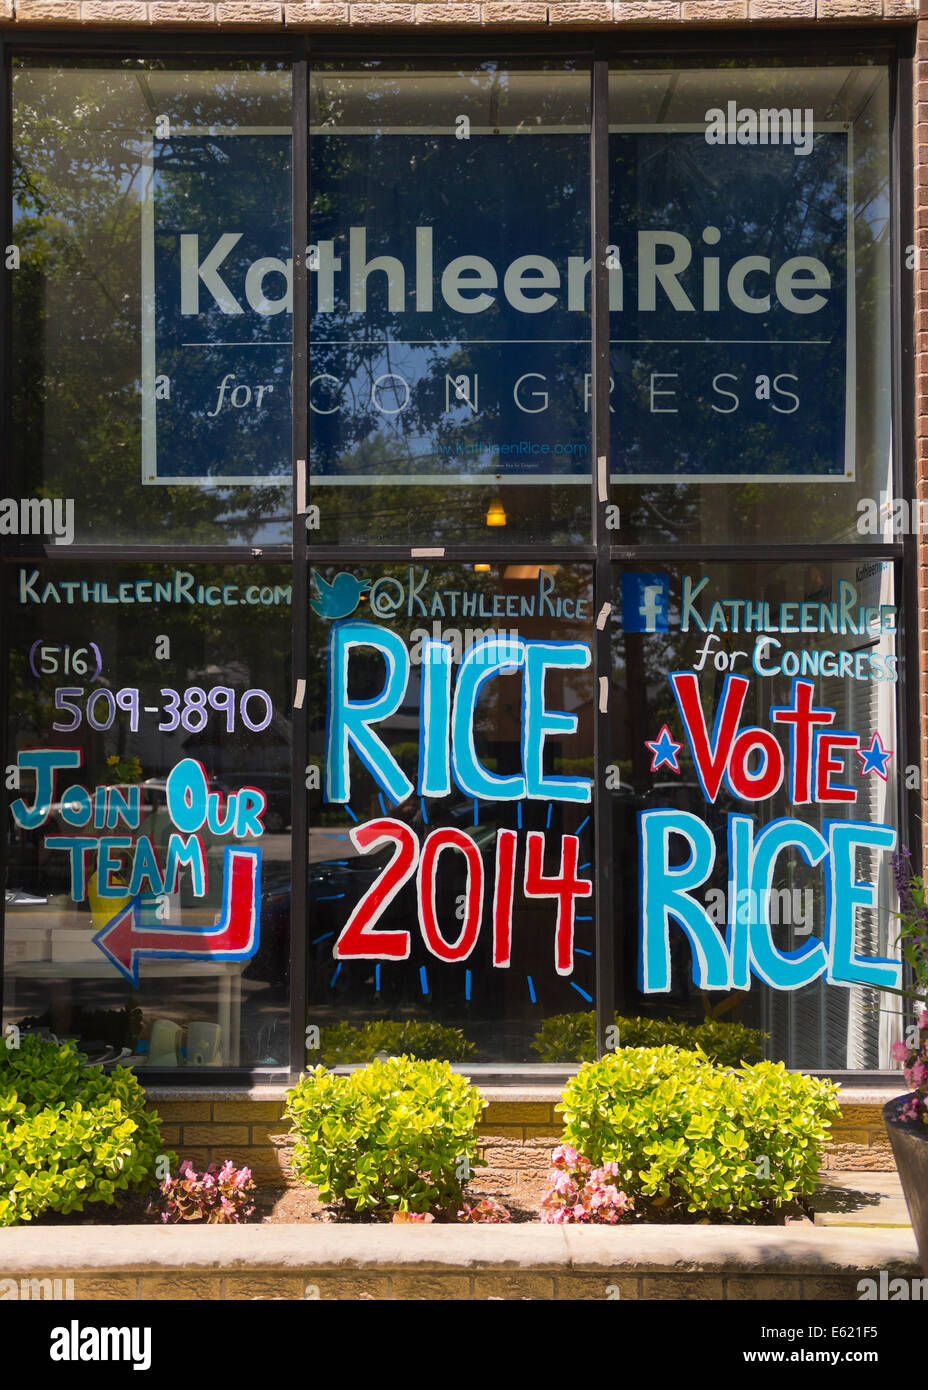 Garden City South, New York, U.S. - August 11, 2014 - Kathleen Rice's Campaign Field Office is the press conference location where Rice, the Democratic candidate for Congress in New York's 4th Congressional District, was endorsed by NARAL Pro-Choice New York and Planned Parenthood of Nassau County Action Fund, NARAL. The office's front window has Rice 2014 in red white and blue. Rice is in her third term as Nassau County District Attorney, Long Island. Credit:  Ann E Parry/Alamy Live News Stock Photo